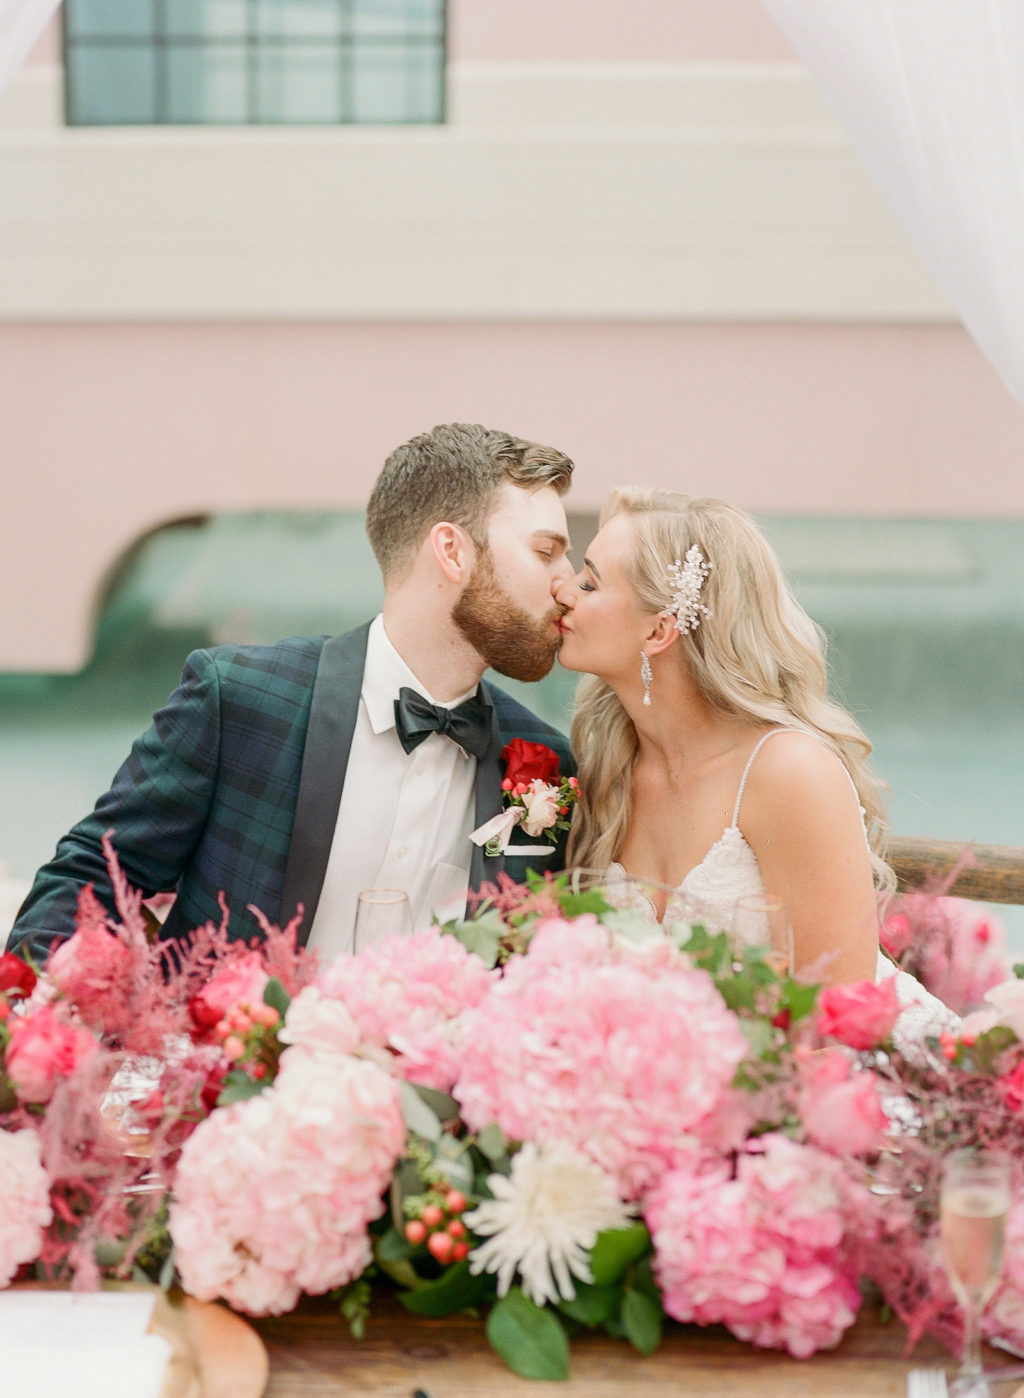 Elegant Bride and Groom Kissing at Wedding Reception with Lush Pink Hydrangeas Floral Decor | Tampa Bay Wedding Hair and Makeup Femme Akoi Beauty Studio